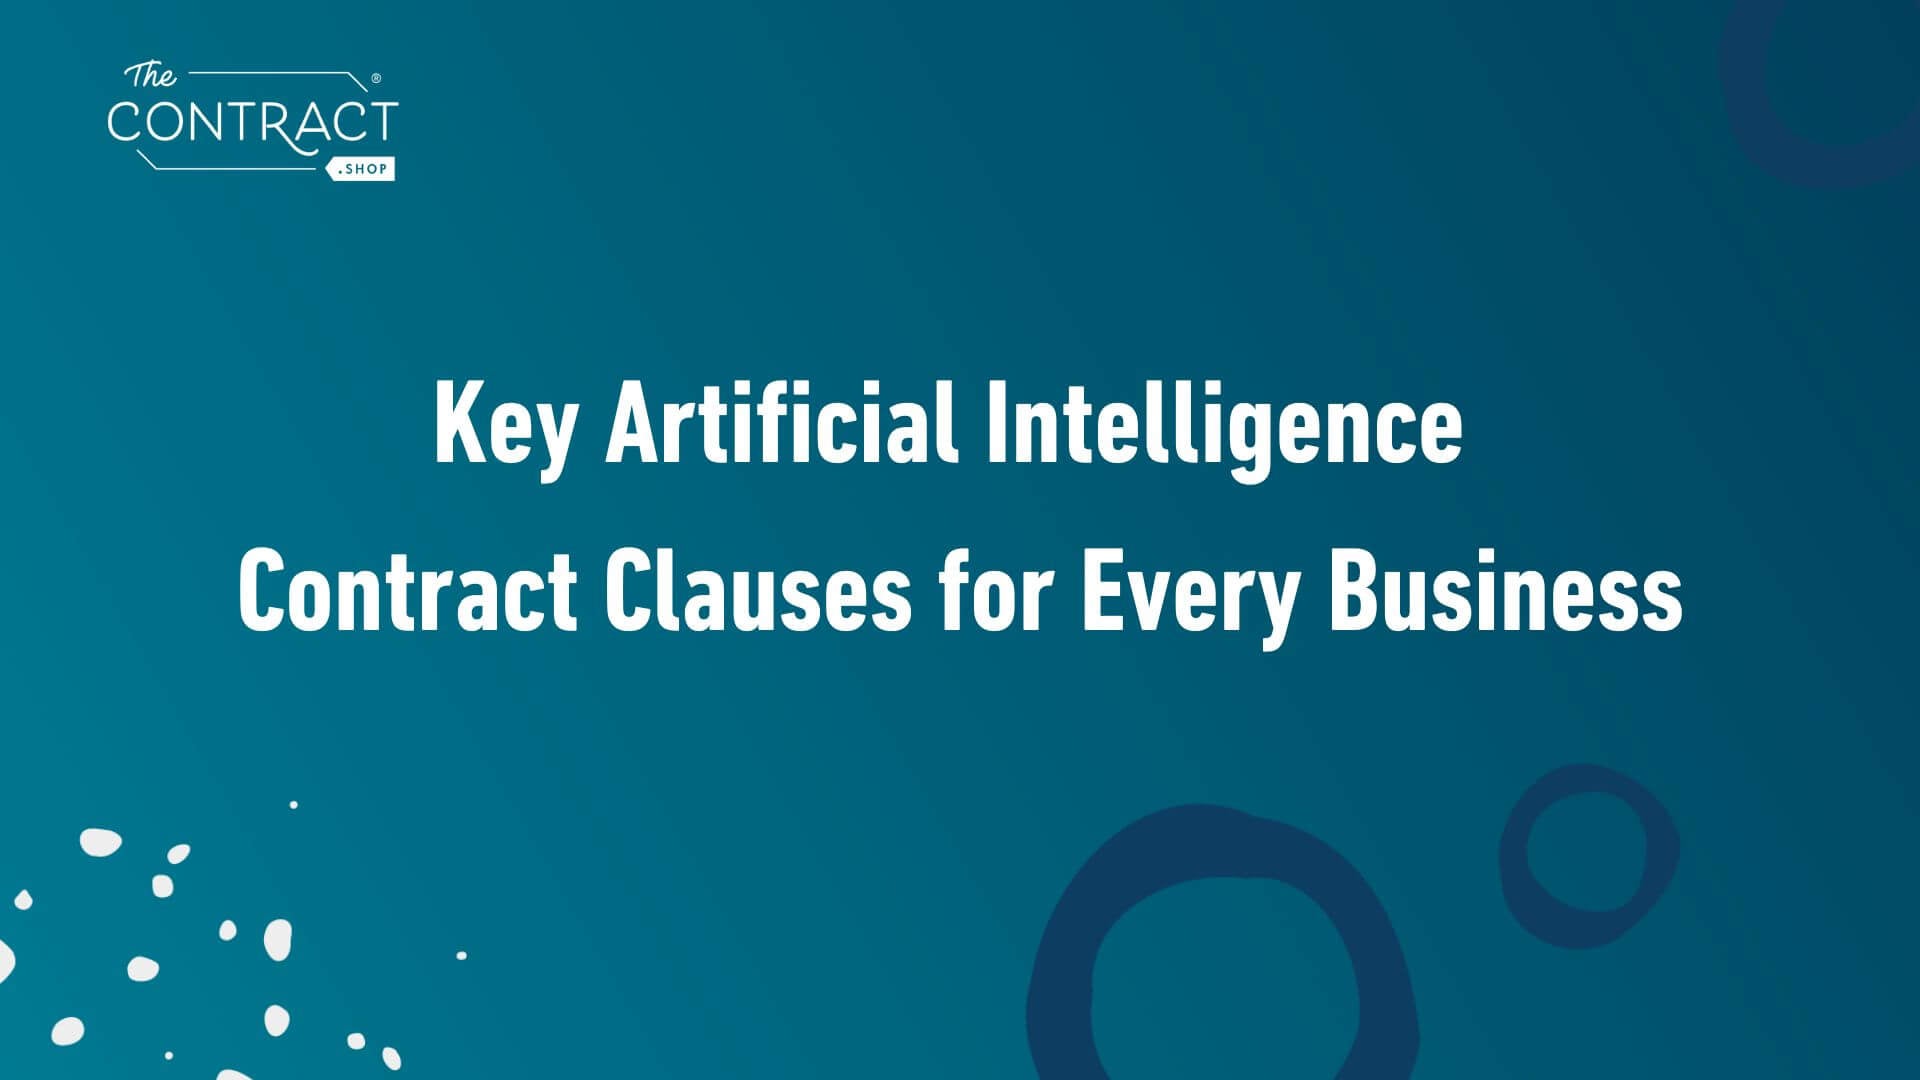 Key Artificial Intelligence Contract Clauses for Every Business